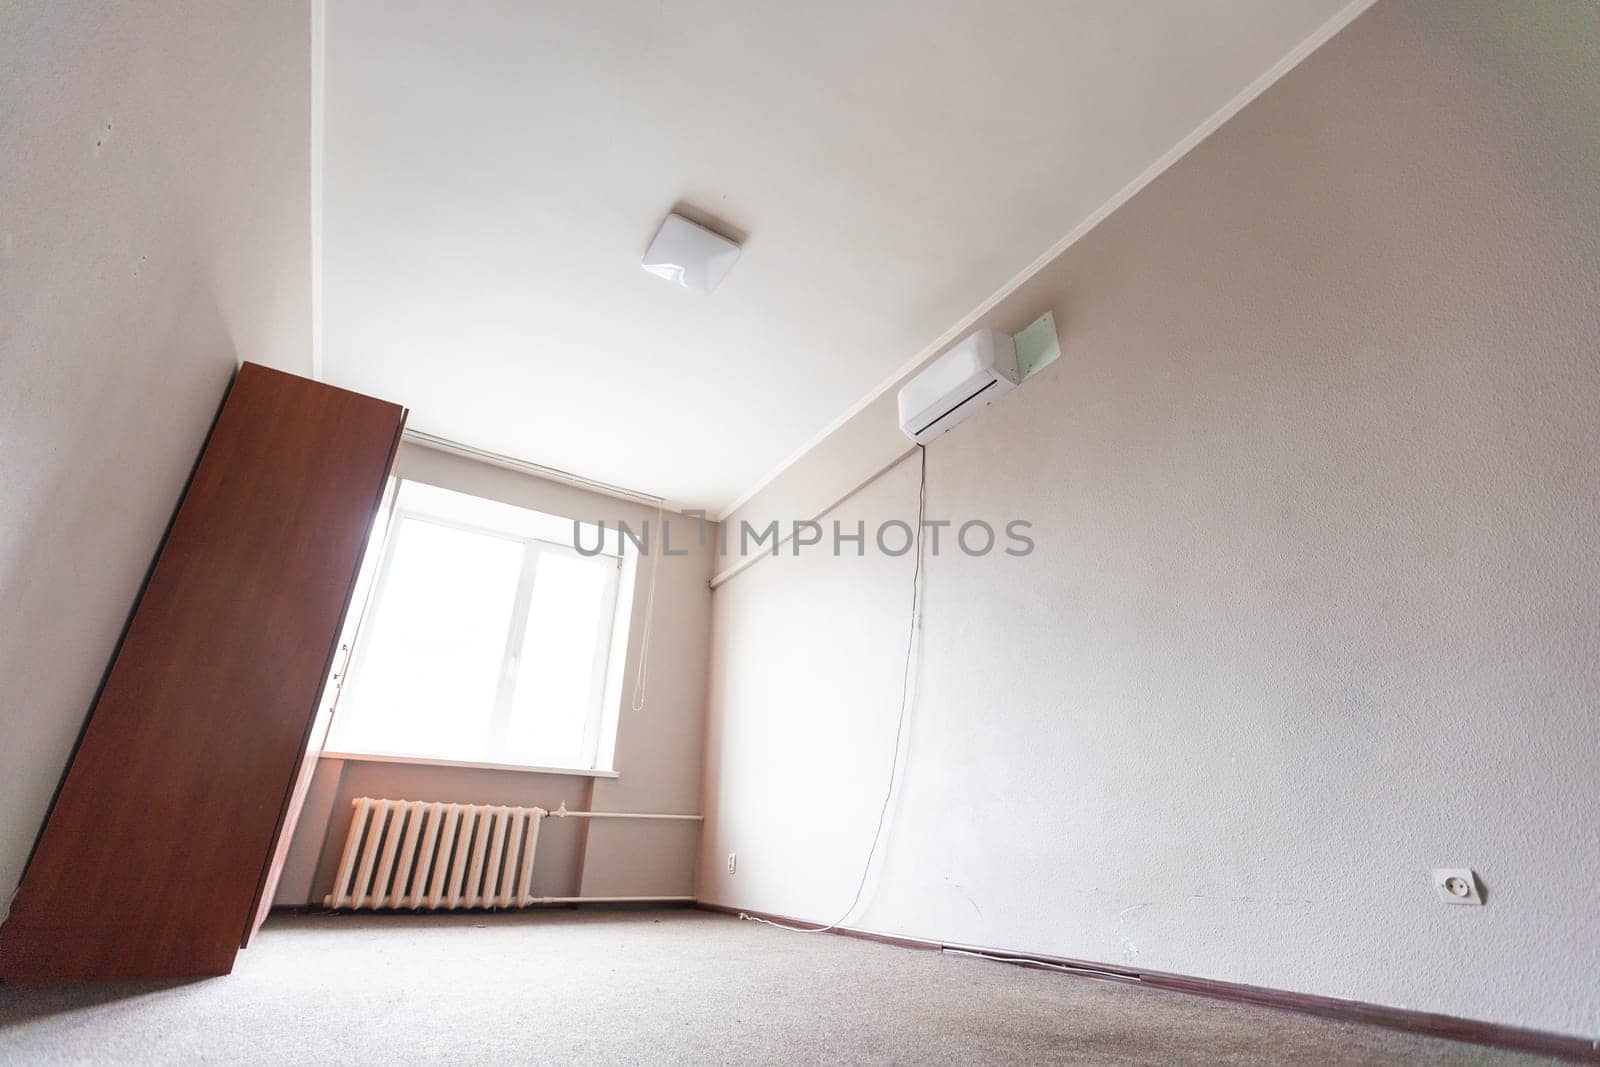 Empty room with all white walls and parquet floor. Nobody inside the room. High quality photo